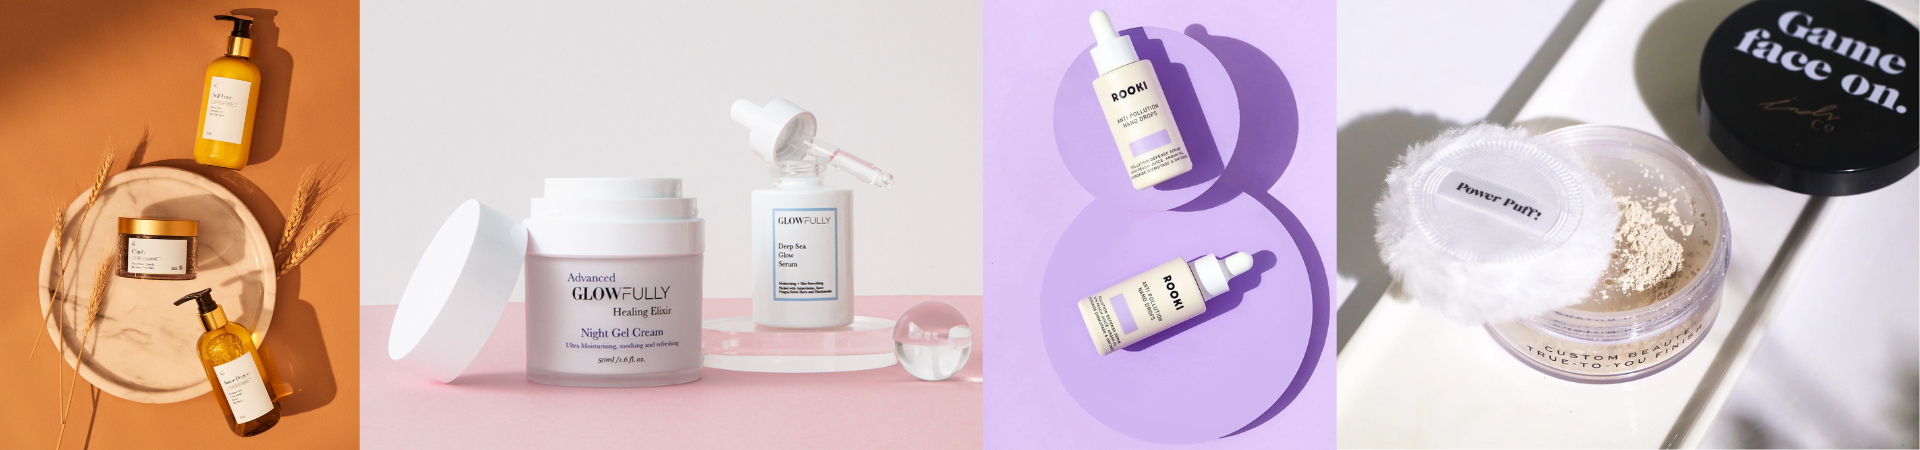 Made in Singapore: Local Beauty Brands to Watch Out For